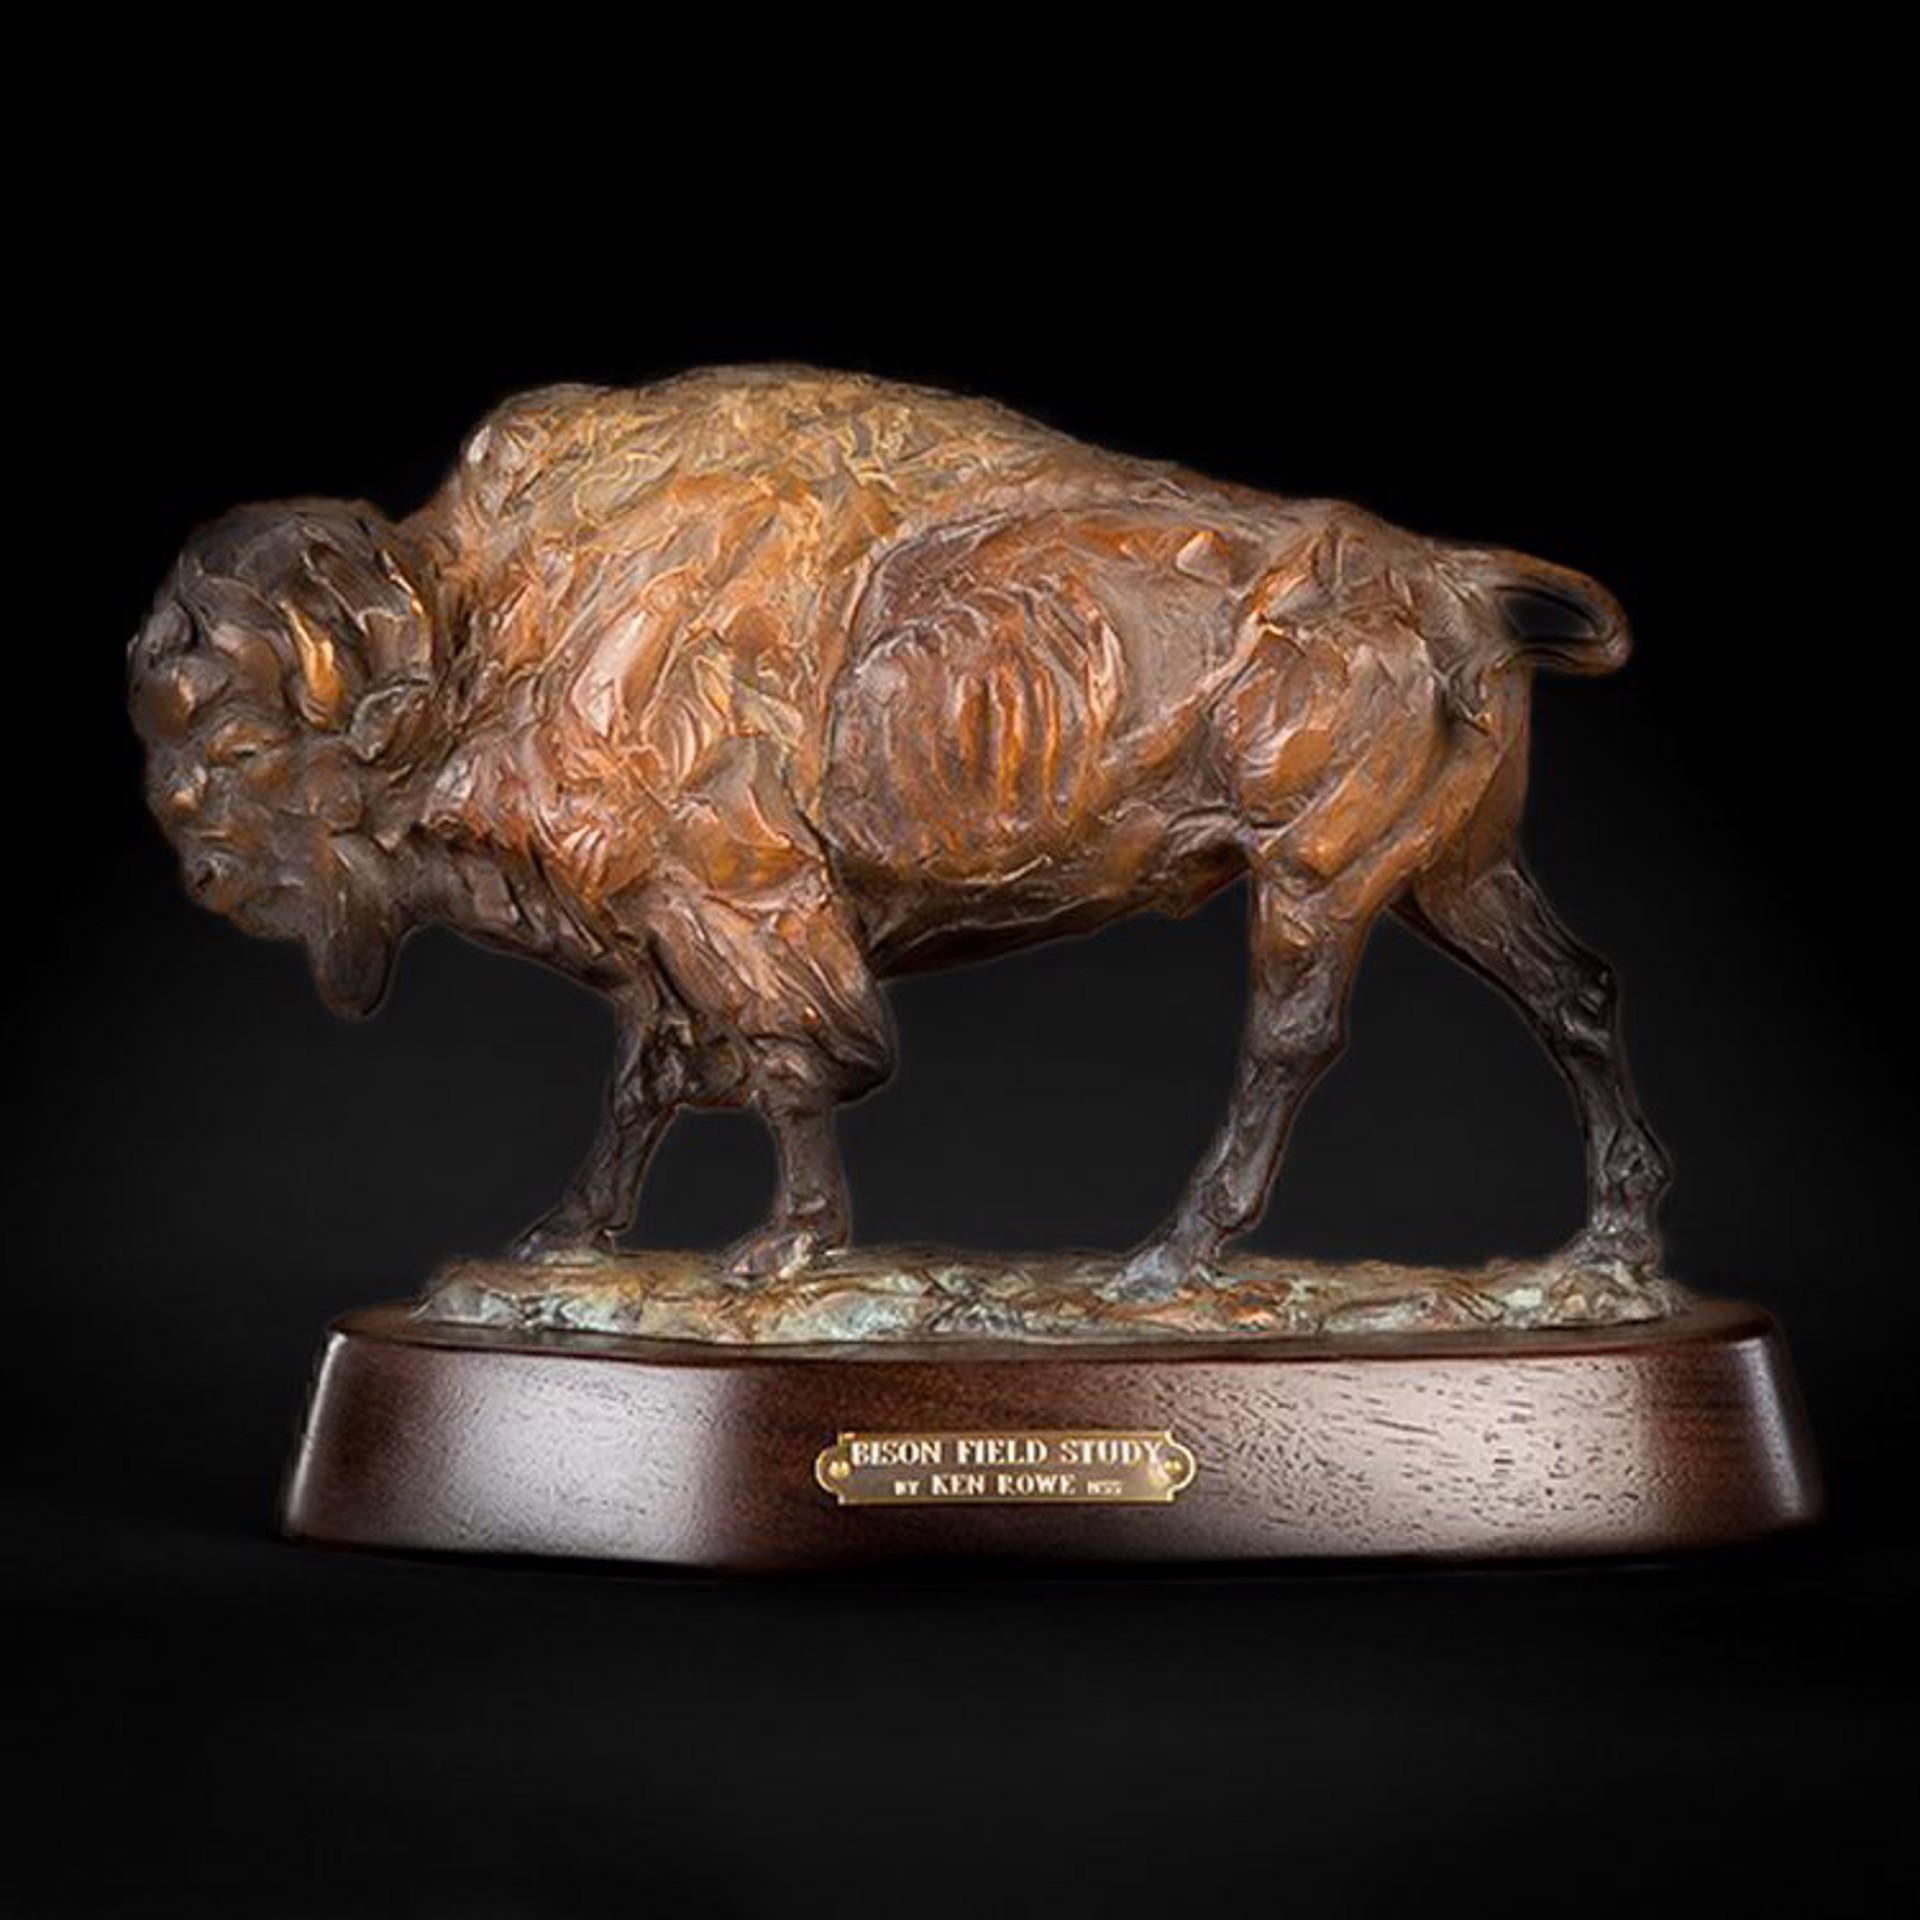 Bison Field Study (Edition of 99) by Ken Rowe